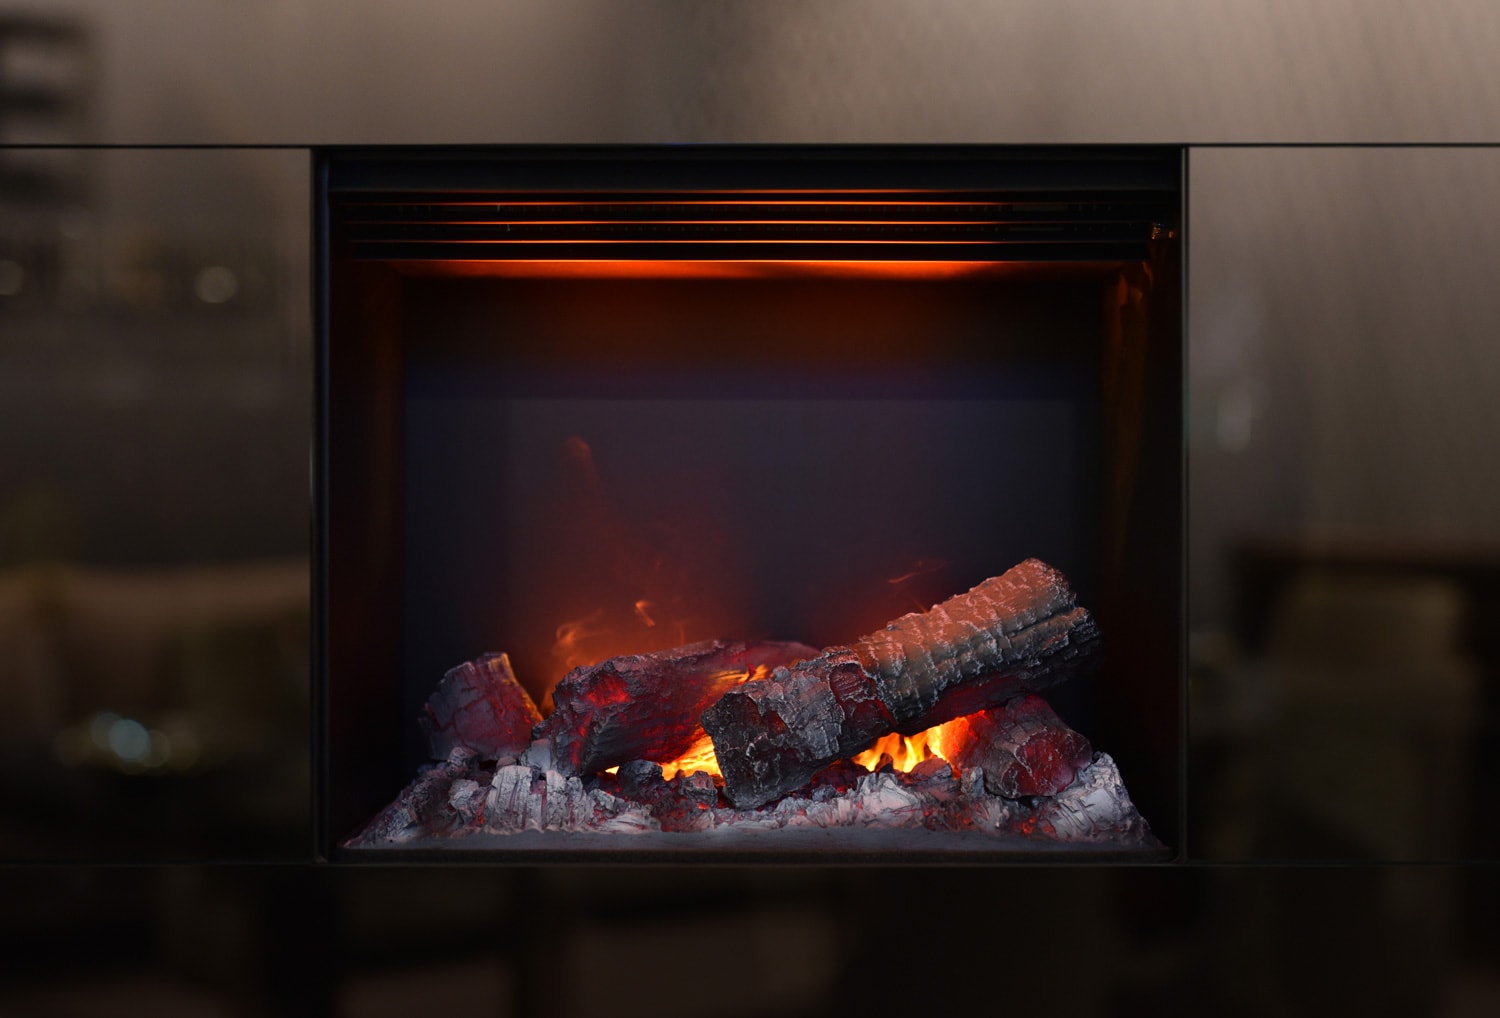 fake firewood fireplace working on electricity built in modern furniture